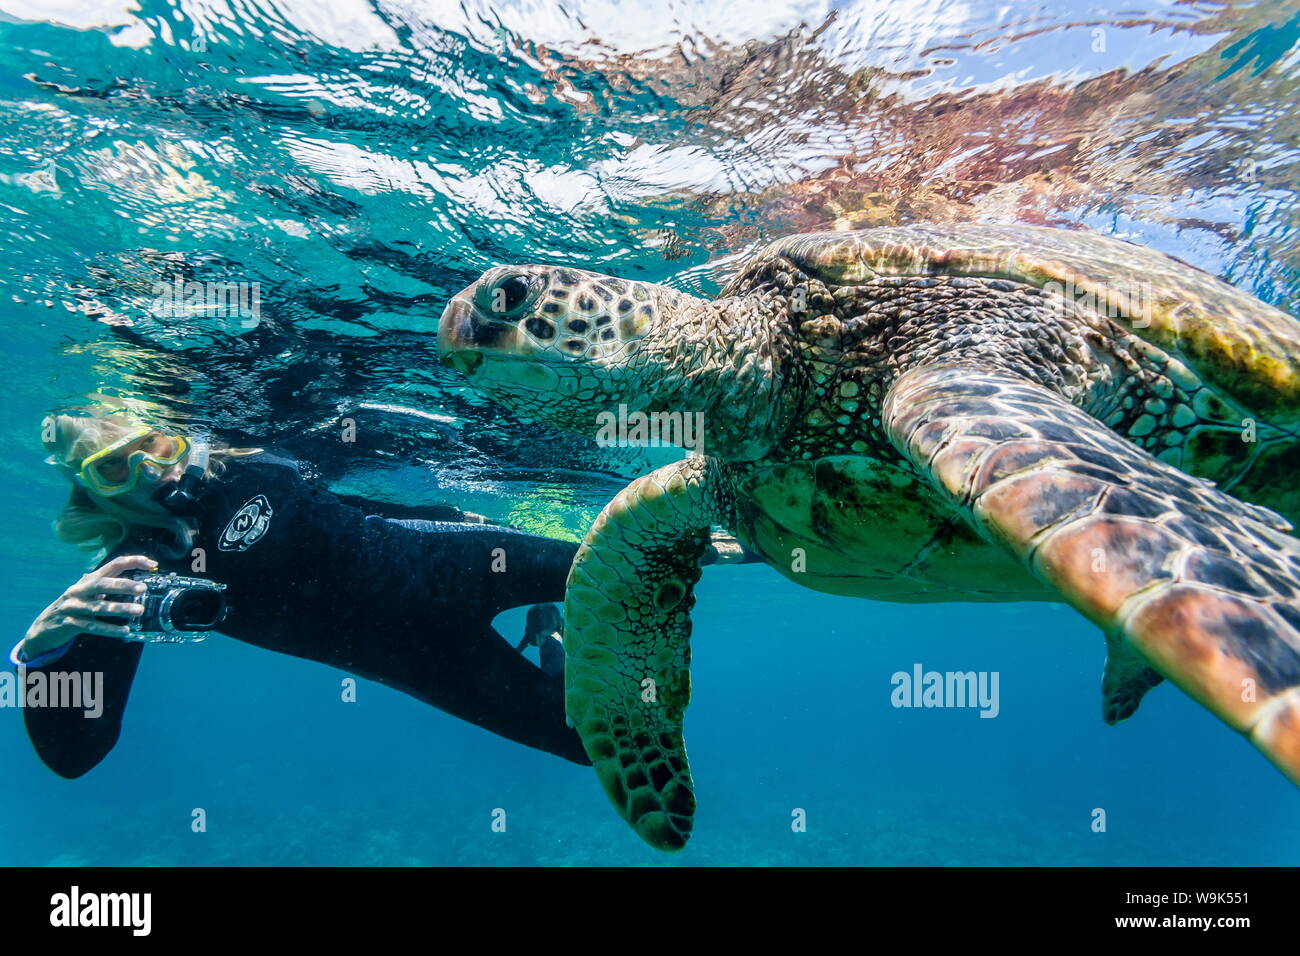 Green sea turtle (Chelonia mydas) underwater with snorkeler, Maui, Hawaii, United States of America, Pacific Stock Photo